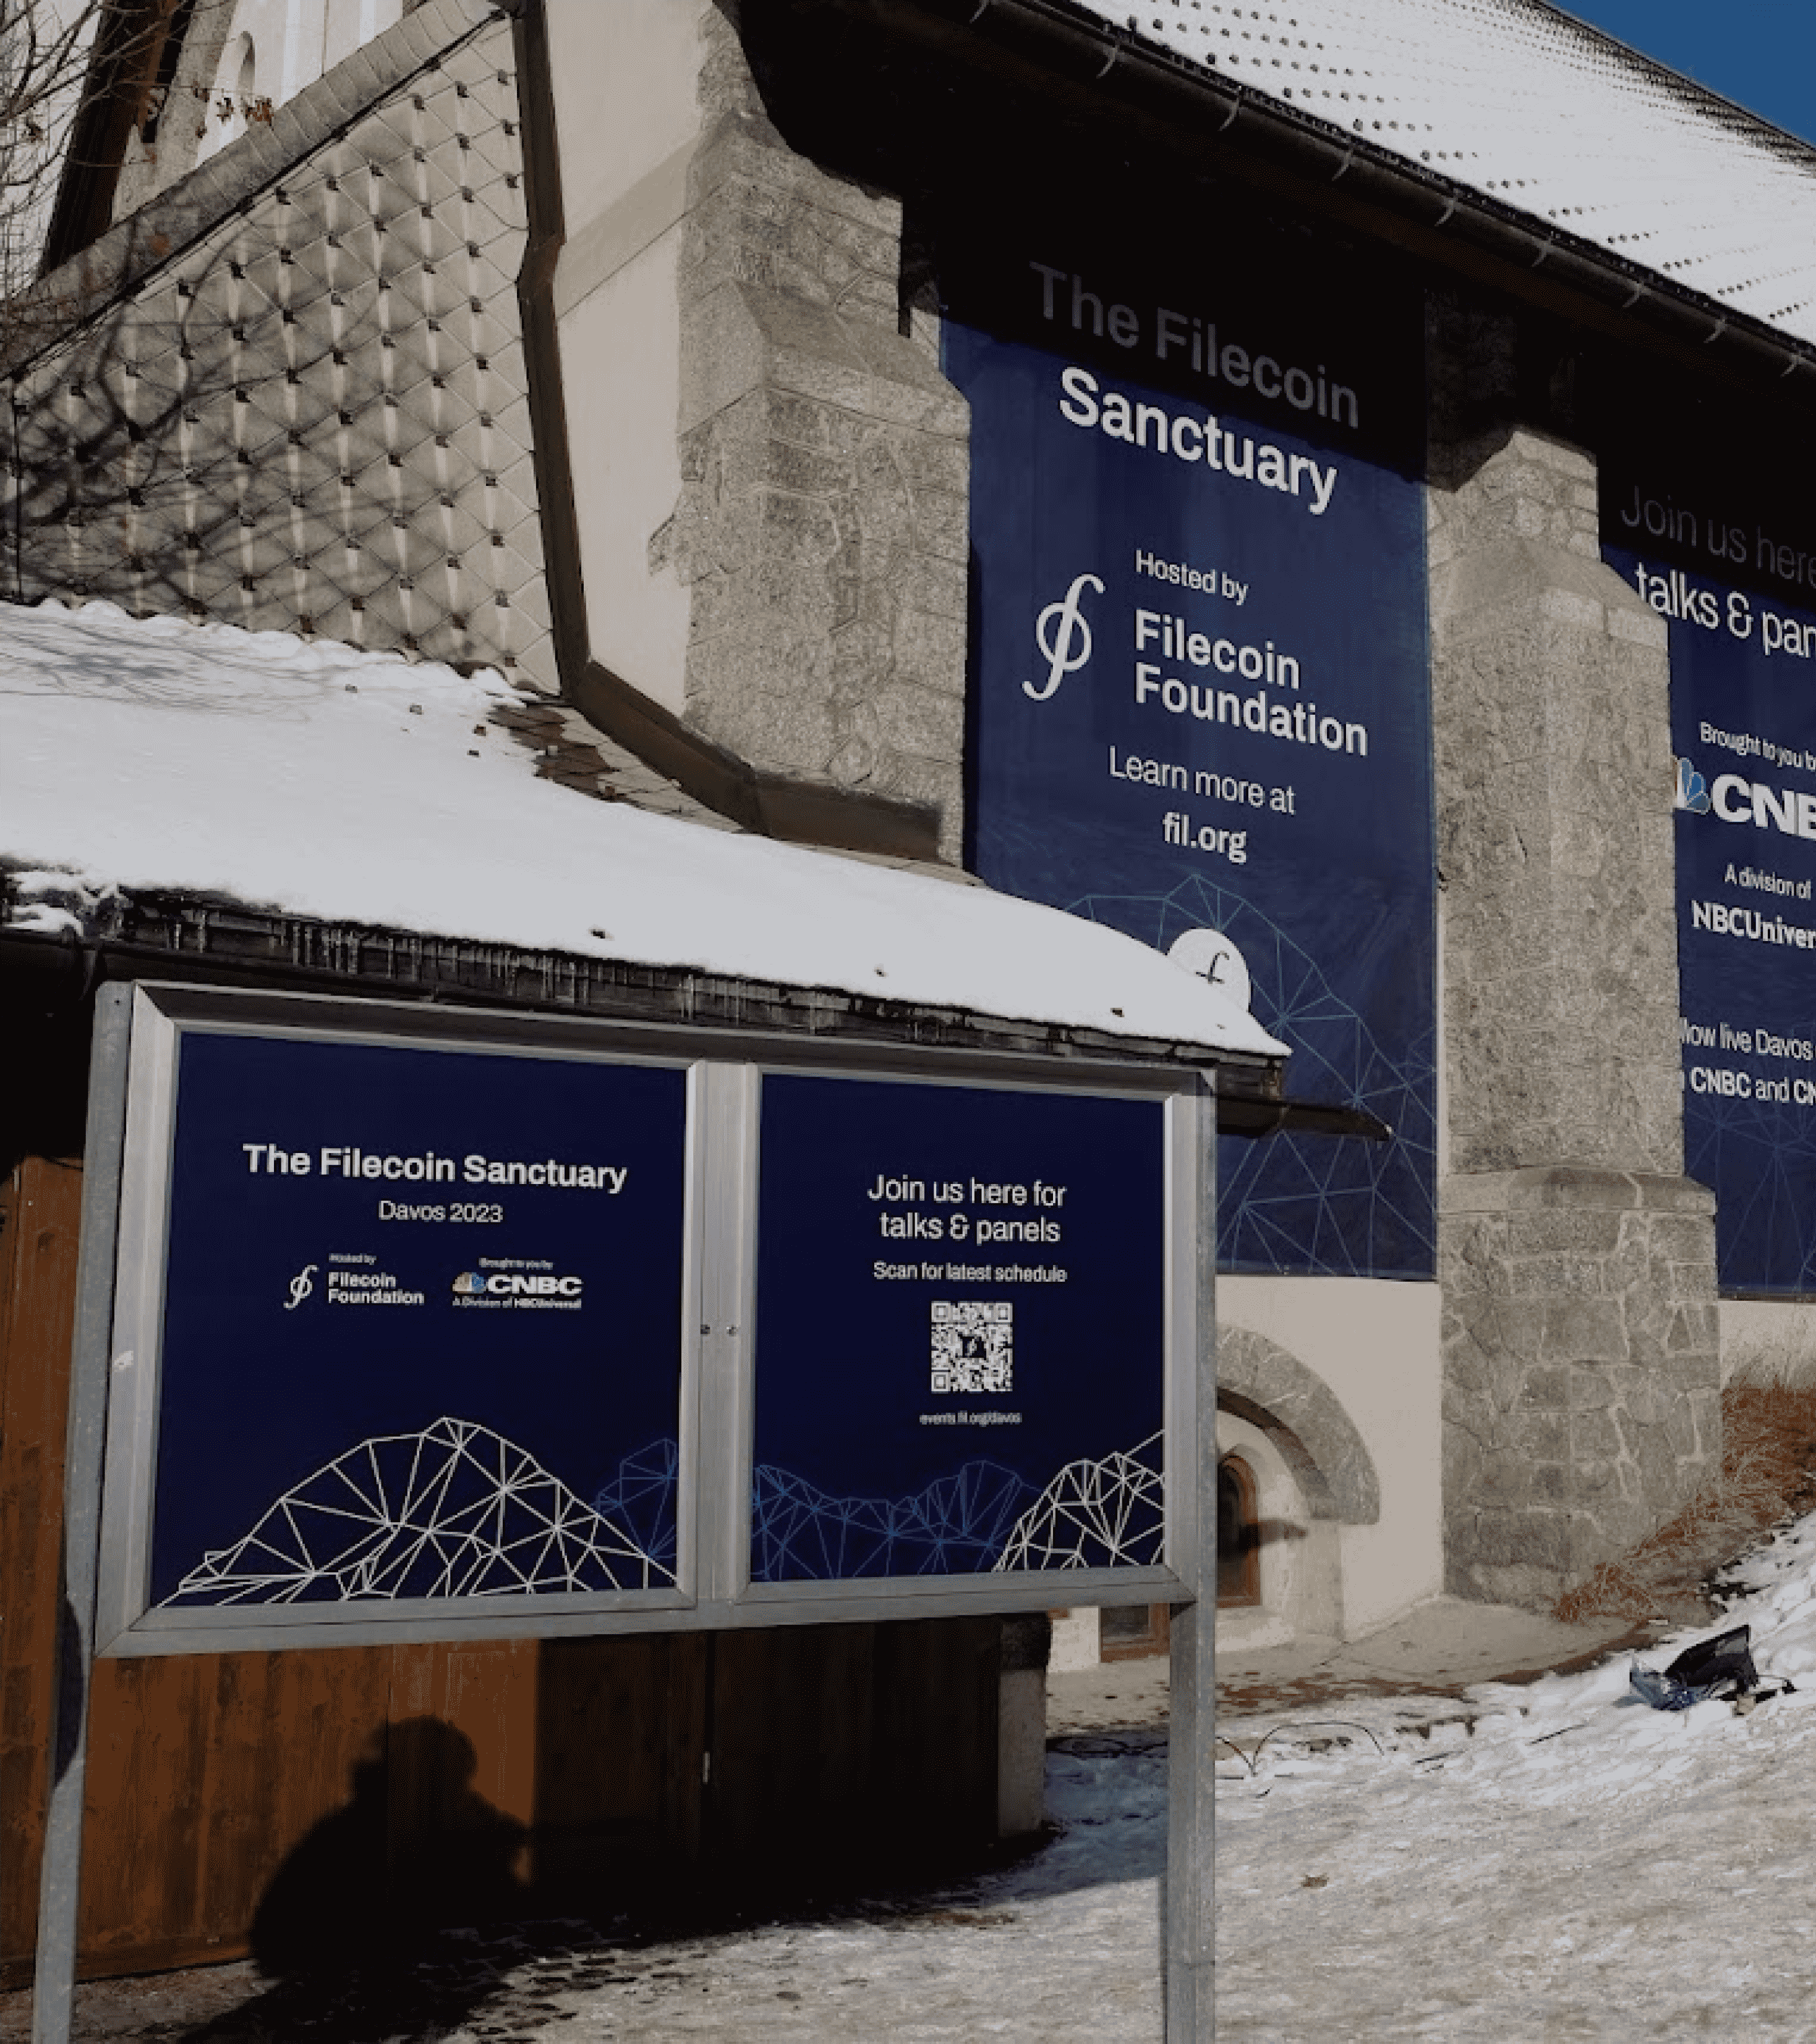 Entrance to the Filecoin sanctuary at Davos.